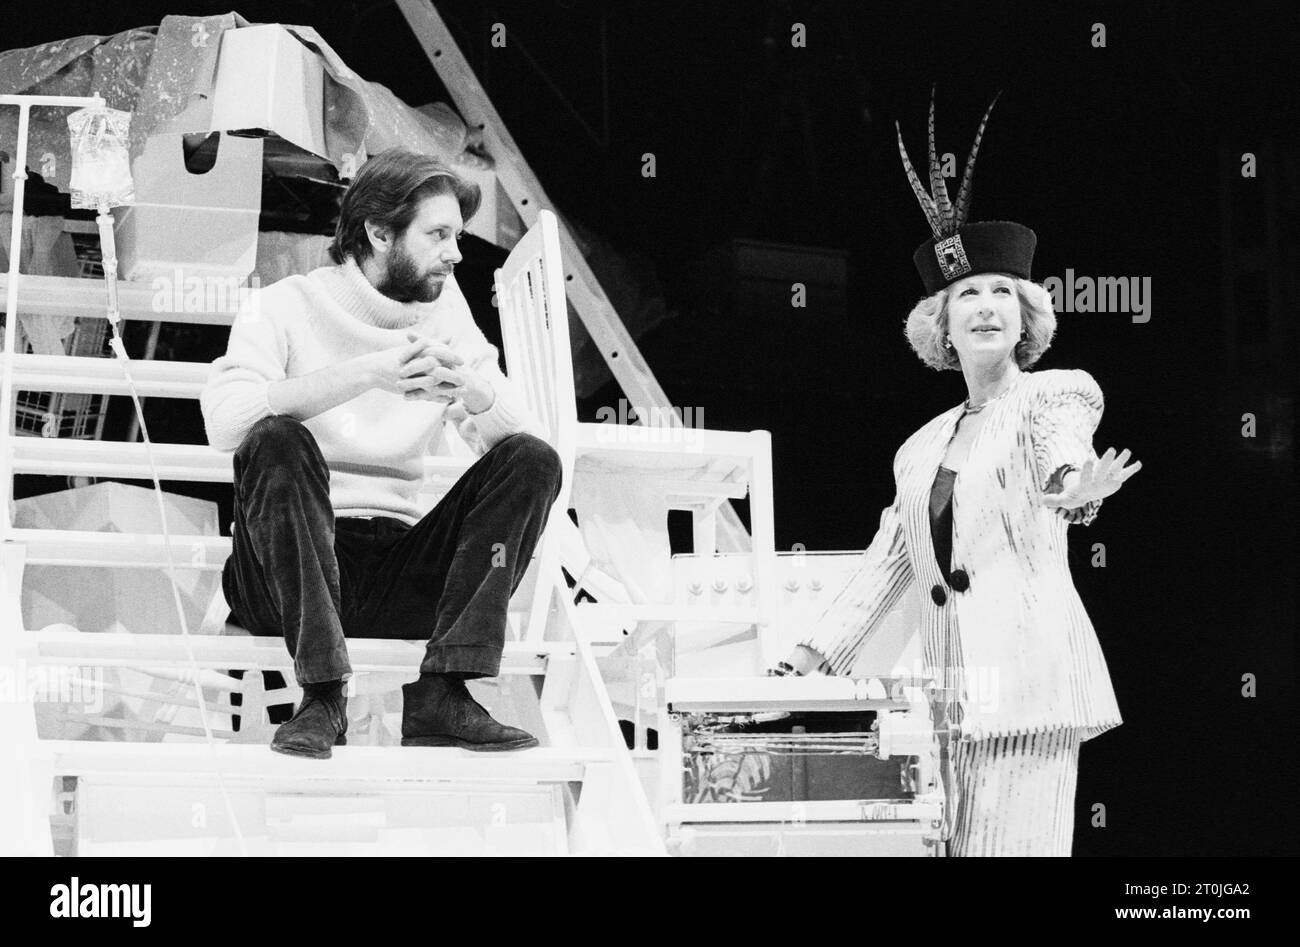 Mike Kenny (Alec), Lucinda Curtis (Marion) in OWNERS by Caryl Churchill at the Young Vic, London SE1 06/04/1987 Design: Mark Thompson Beleuchtung: Paul Denby Regie: Annie Castledine Stockfoto